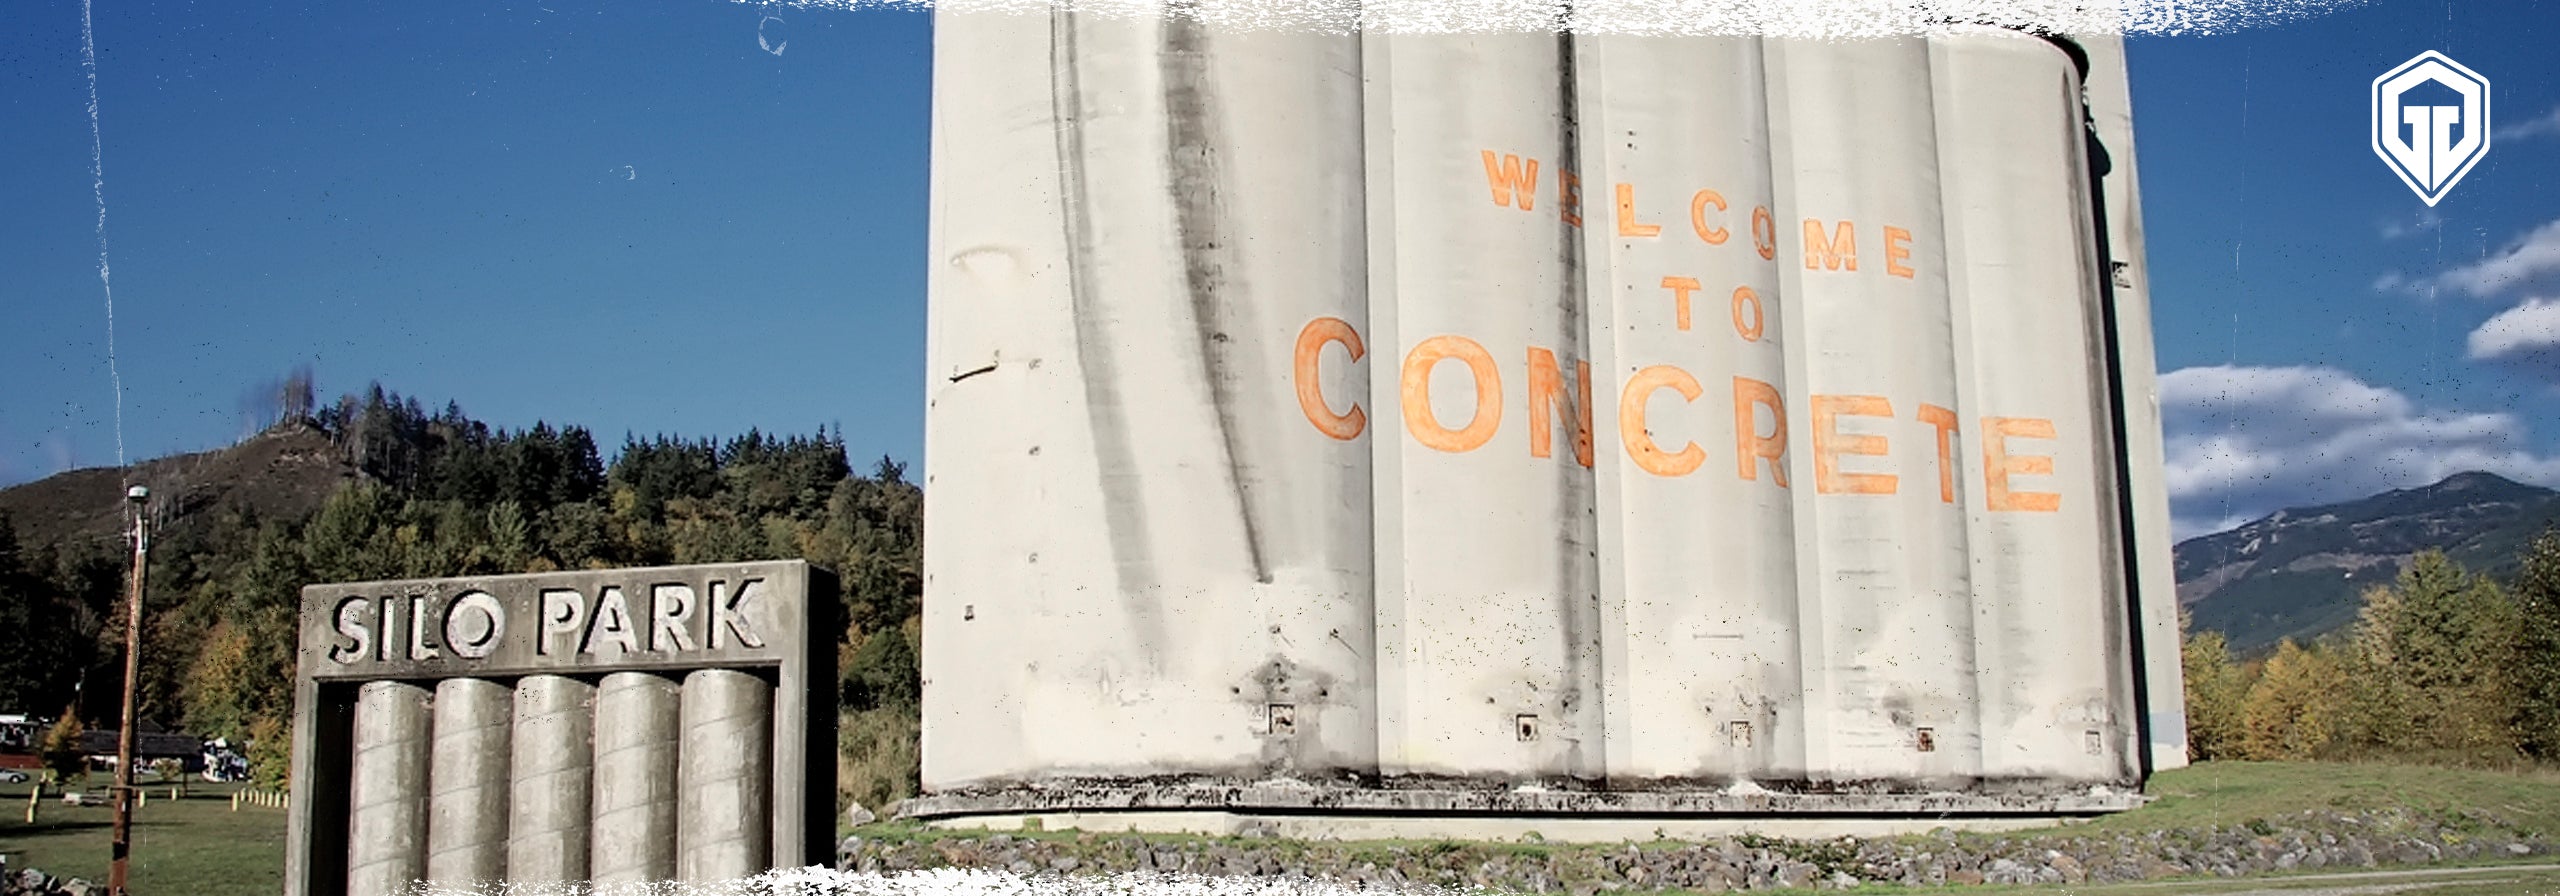 Silo Park and Welcome to Concrete Sign